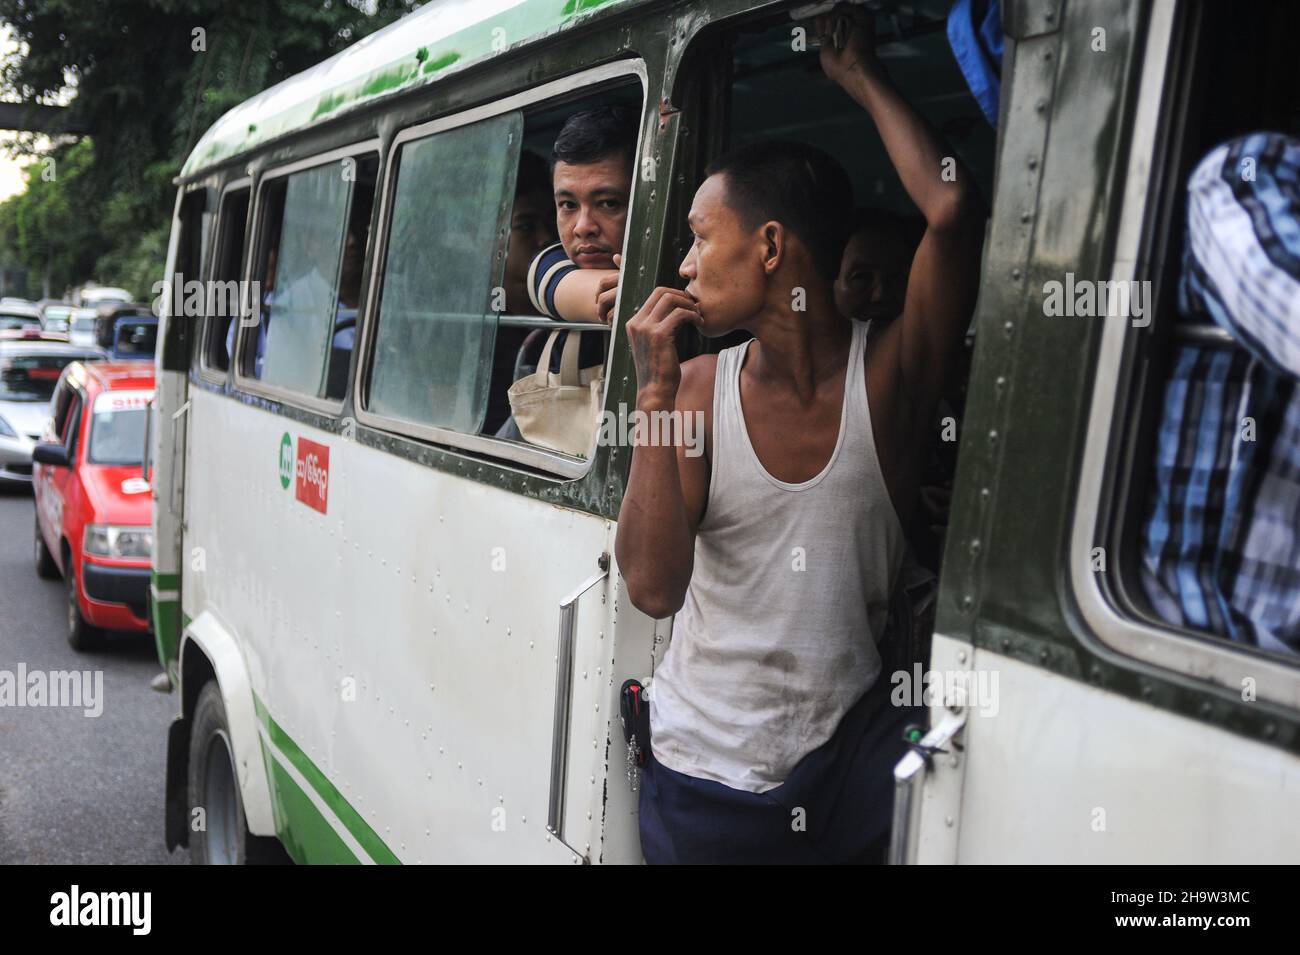 '30.09.2013, Myanmar, , Yangon - A bus conductor of the public transport system stands in the open door of an overcrowded bus while driving through th Stock Photo